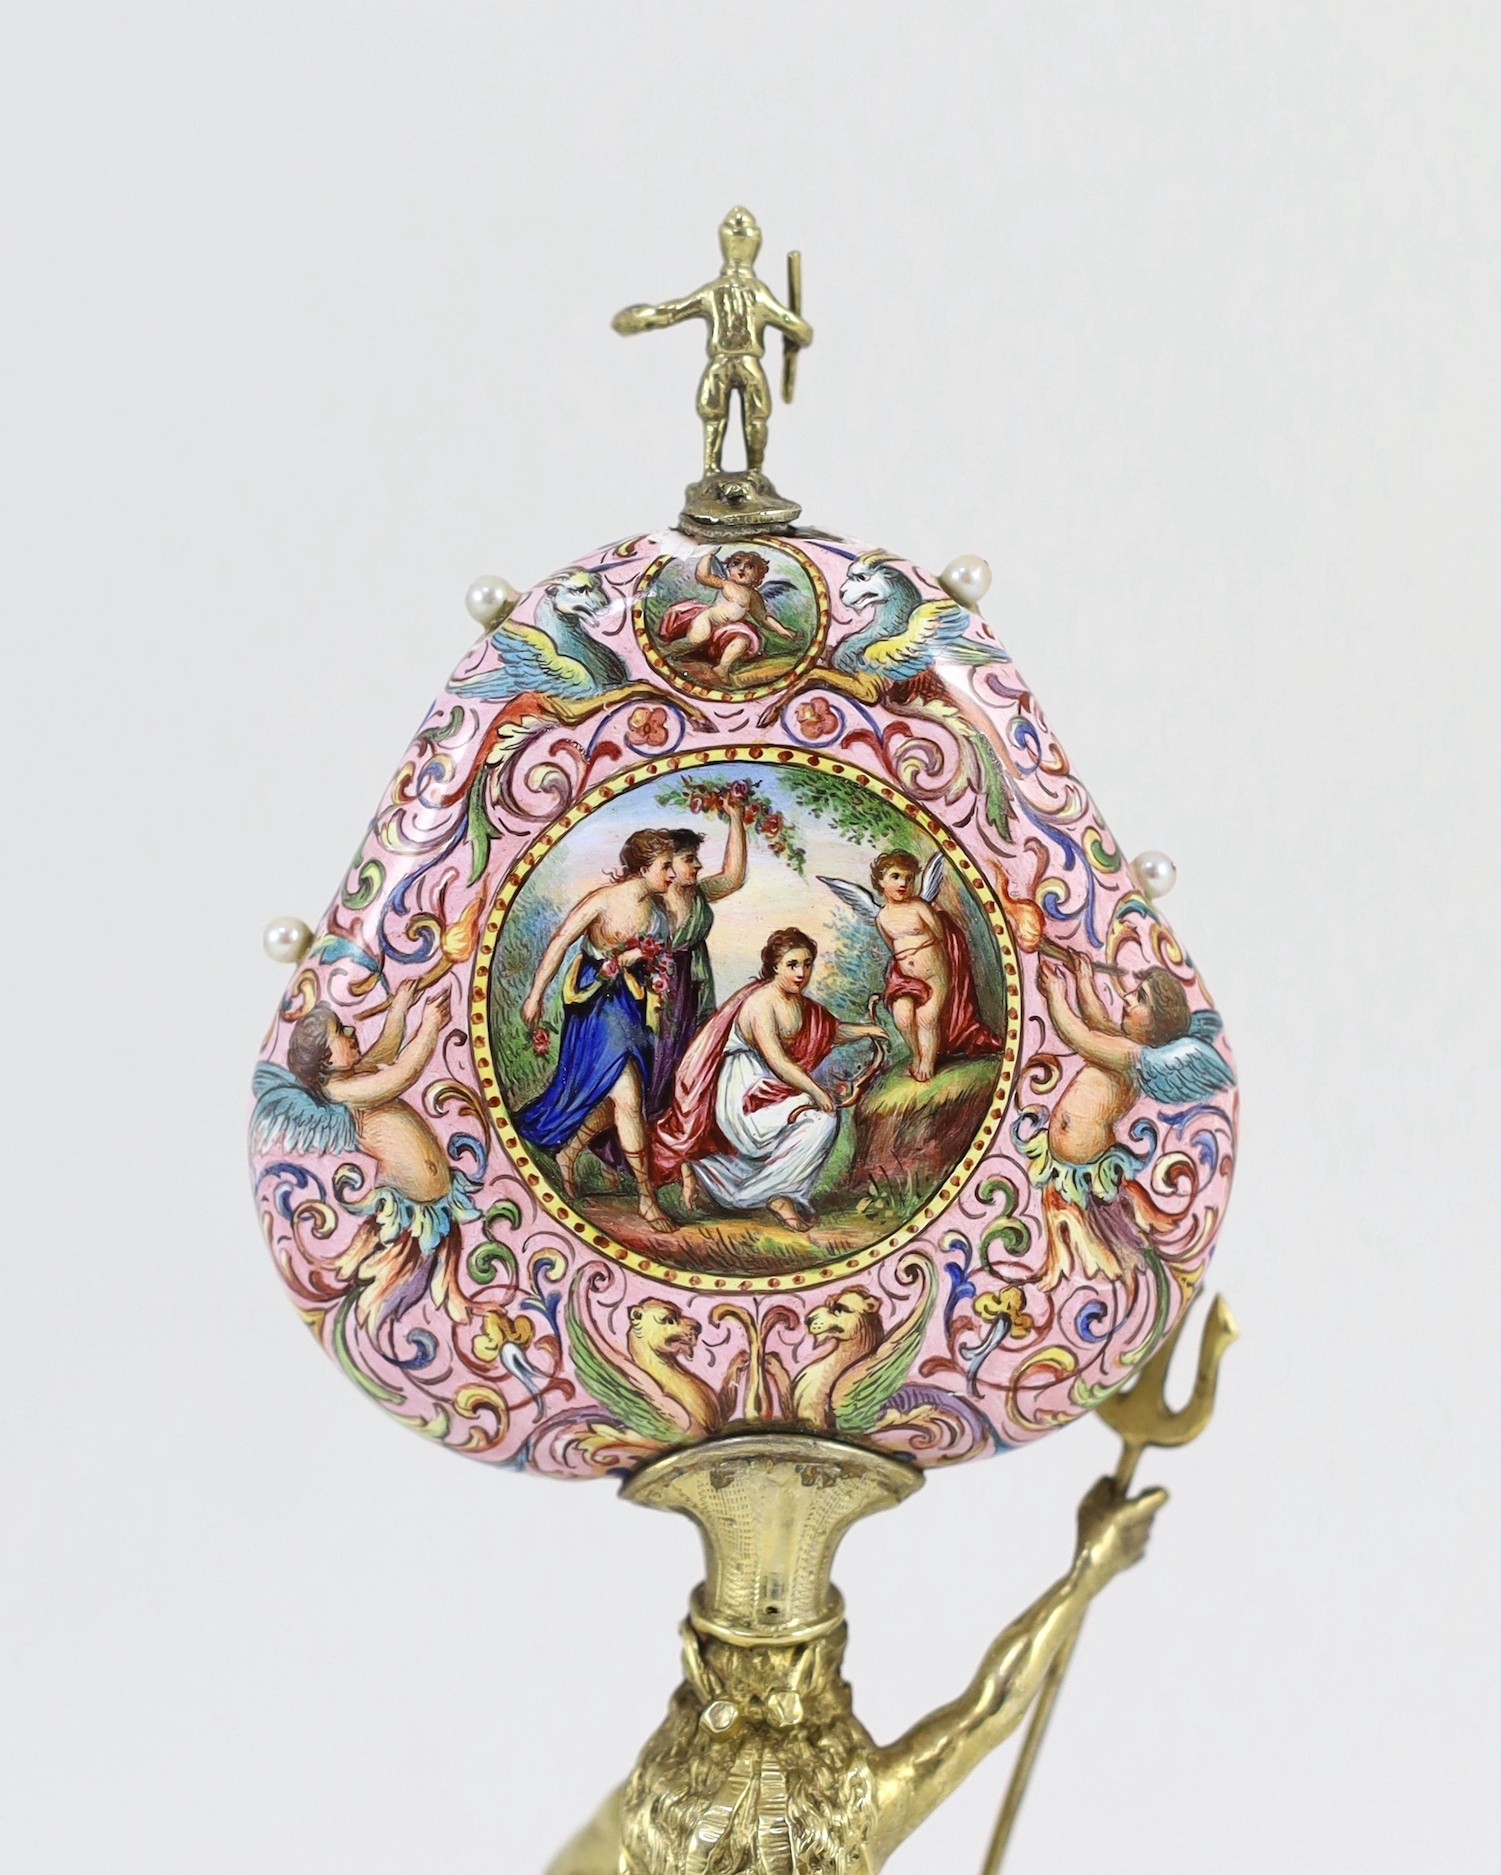 A 19th century Austrian silver-gilt and painted enamel timepiece, Karl Bender, c.1880, width 12cm, height 24cm